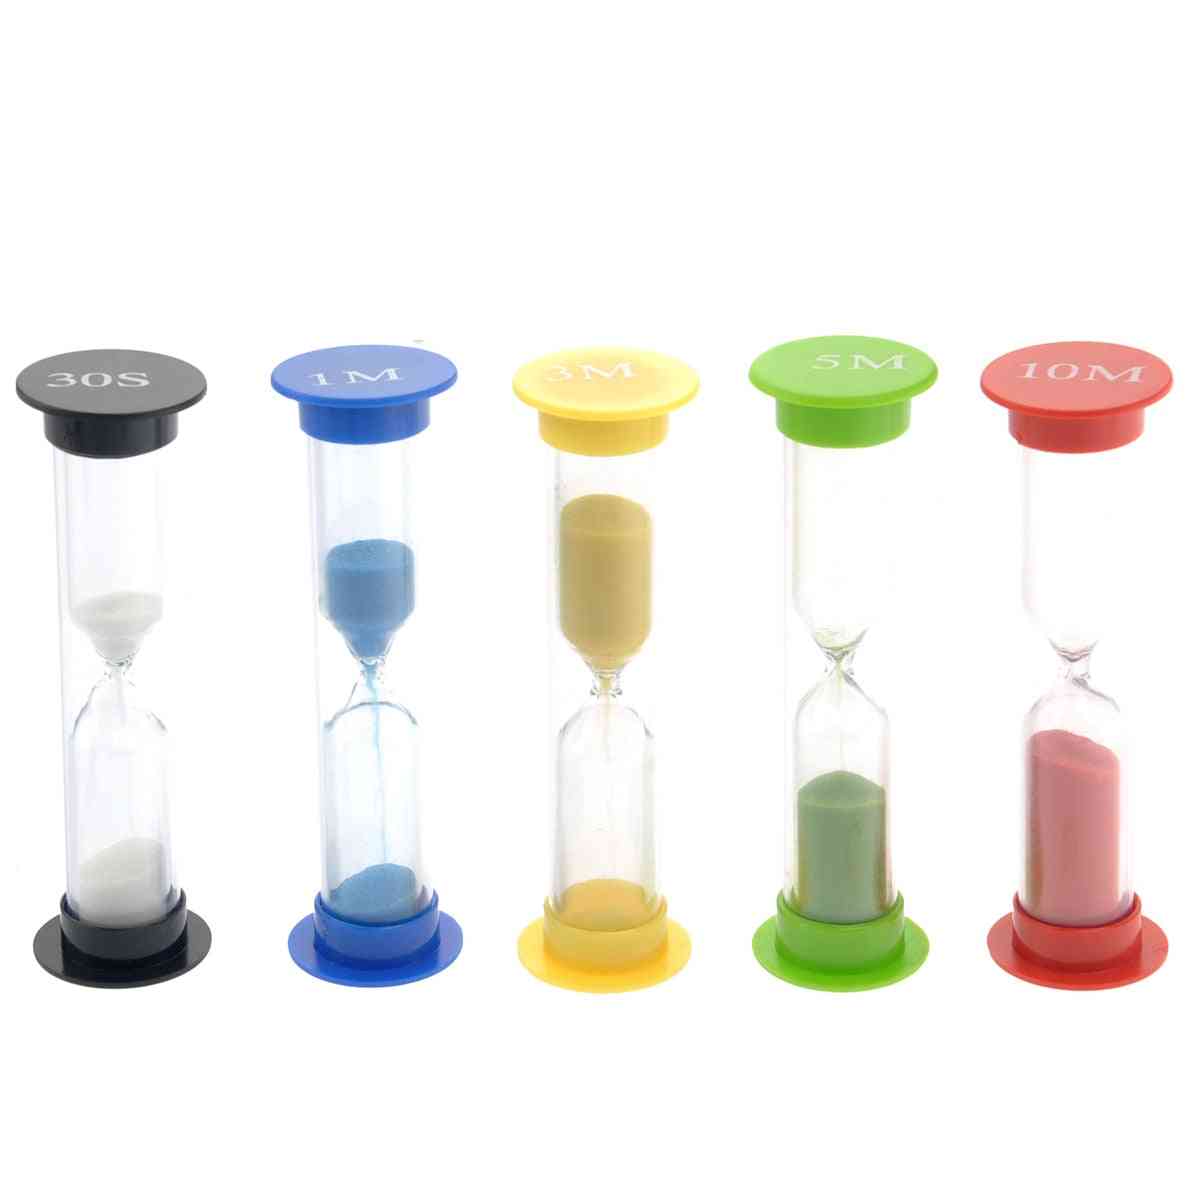 5pcs Hourglass Sand Clock Timers - 30second/1/3/5 /10minutes